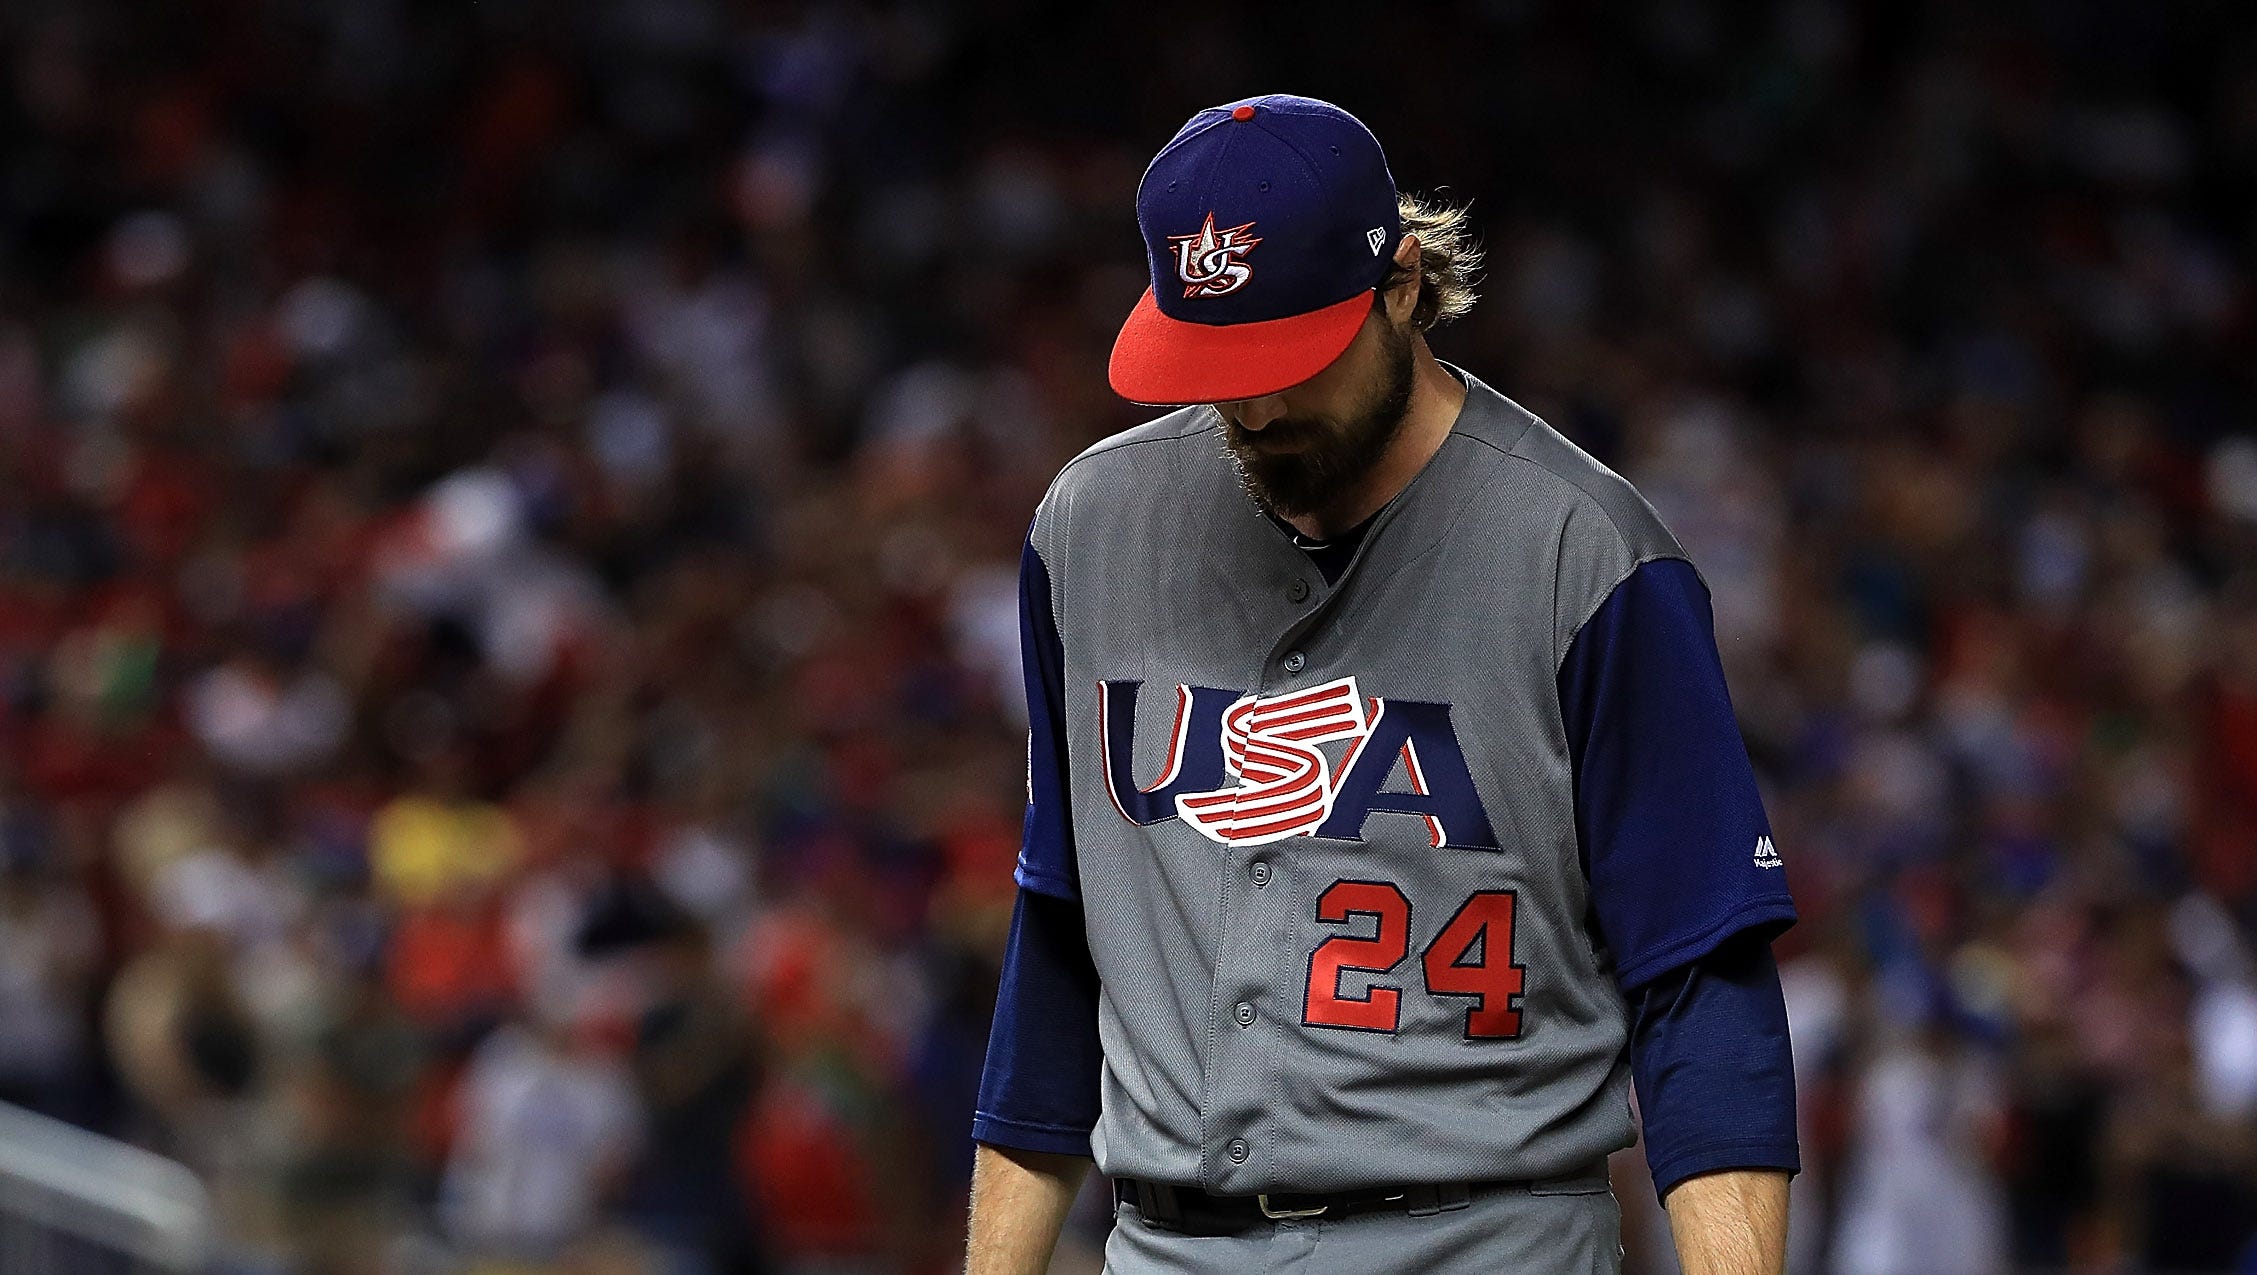 Usa Folds In Face Of Stacked Dominican Lineup Fervent Fans At World Baseball Classic